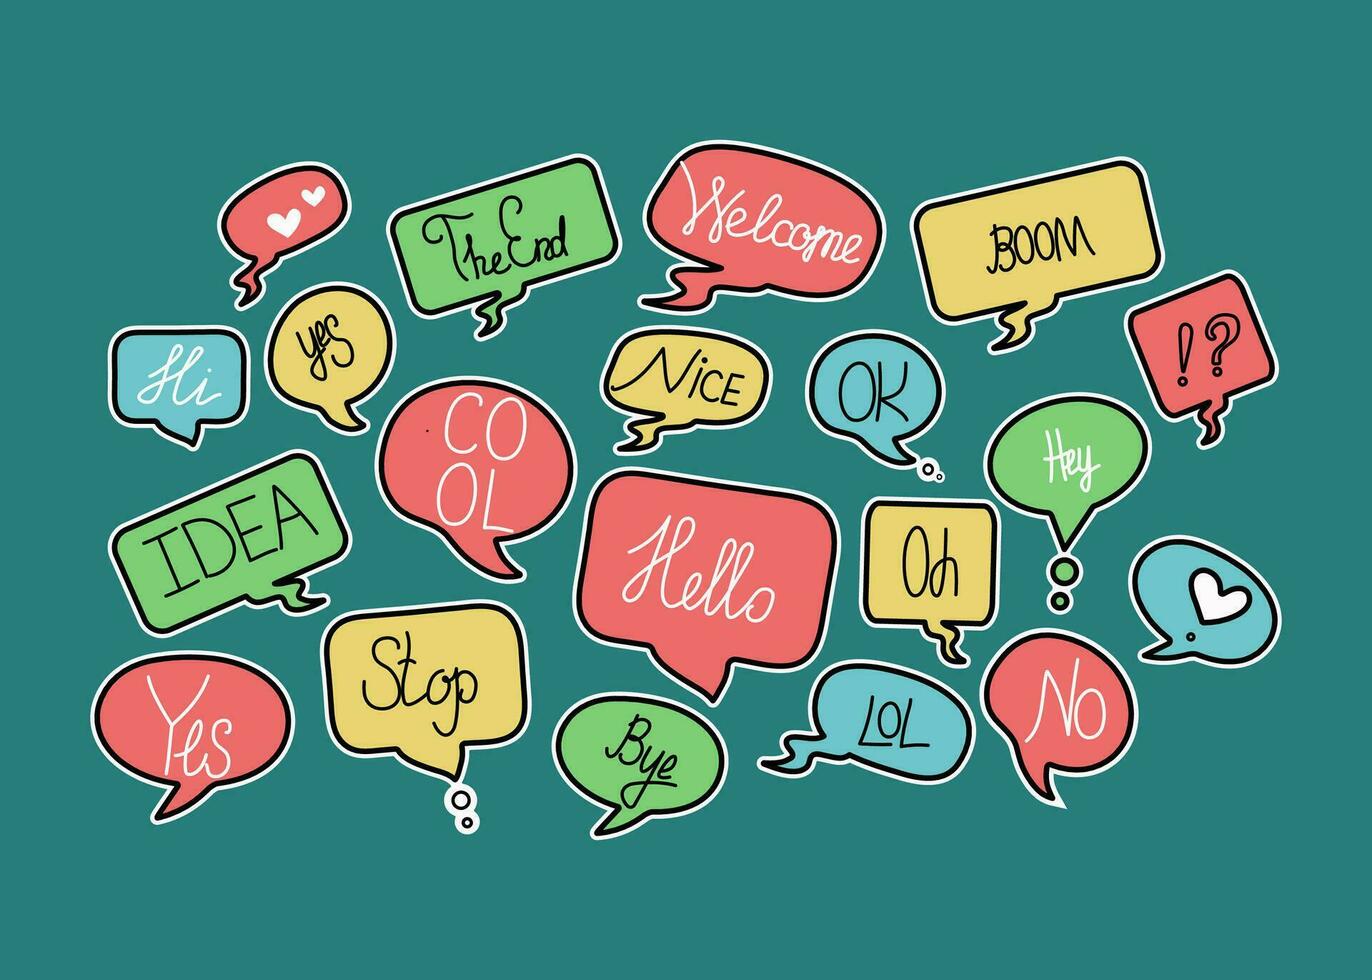 Speech bubbles, Stickers. Short phrases, speech bubble. Vector illustration, isolated background.